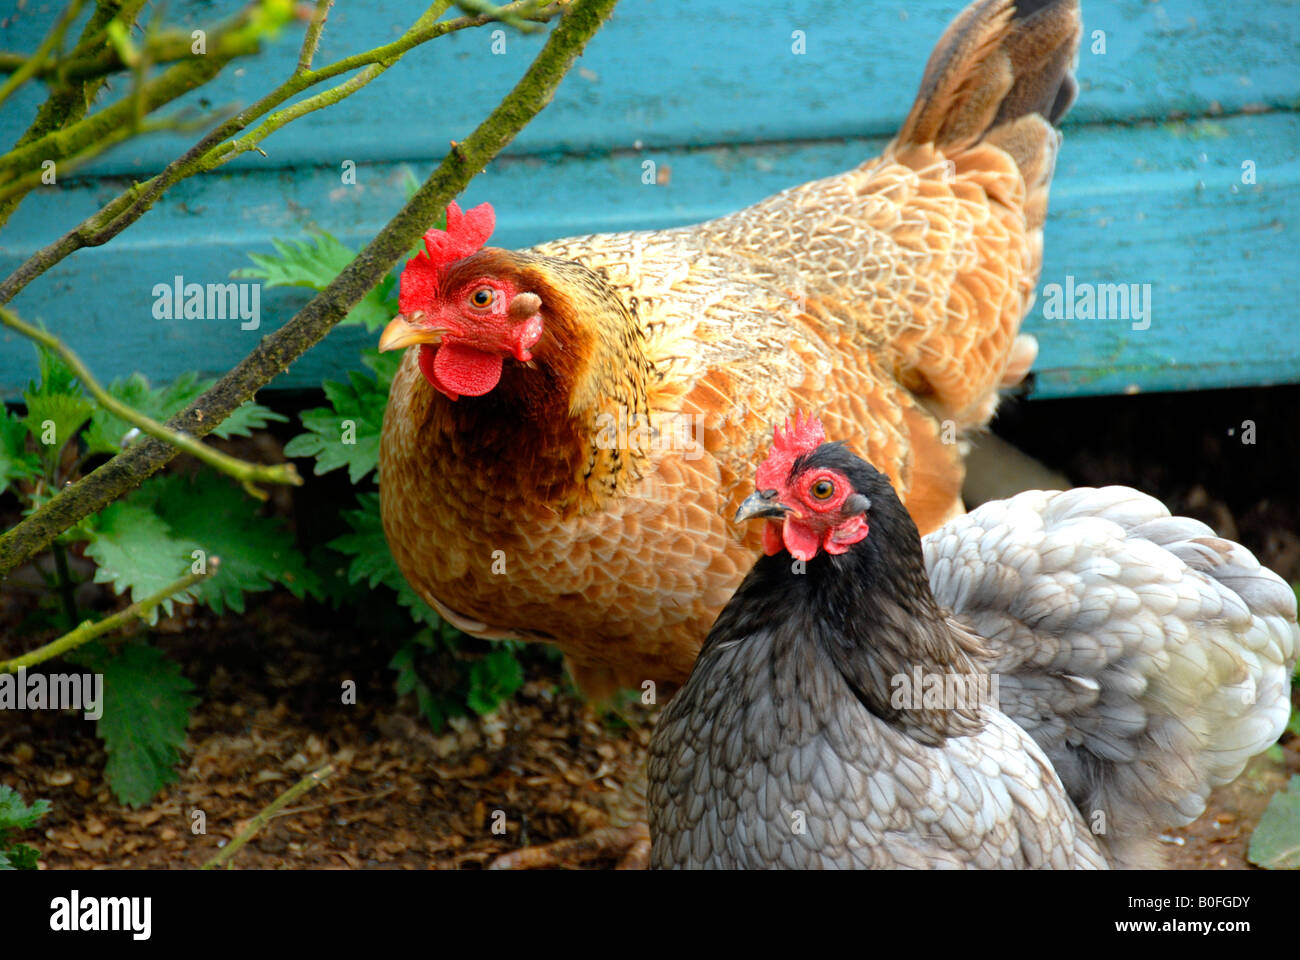 Two hens in their natural environment Stock Photo